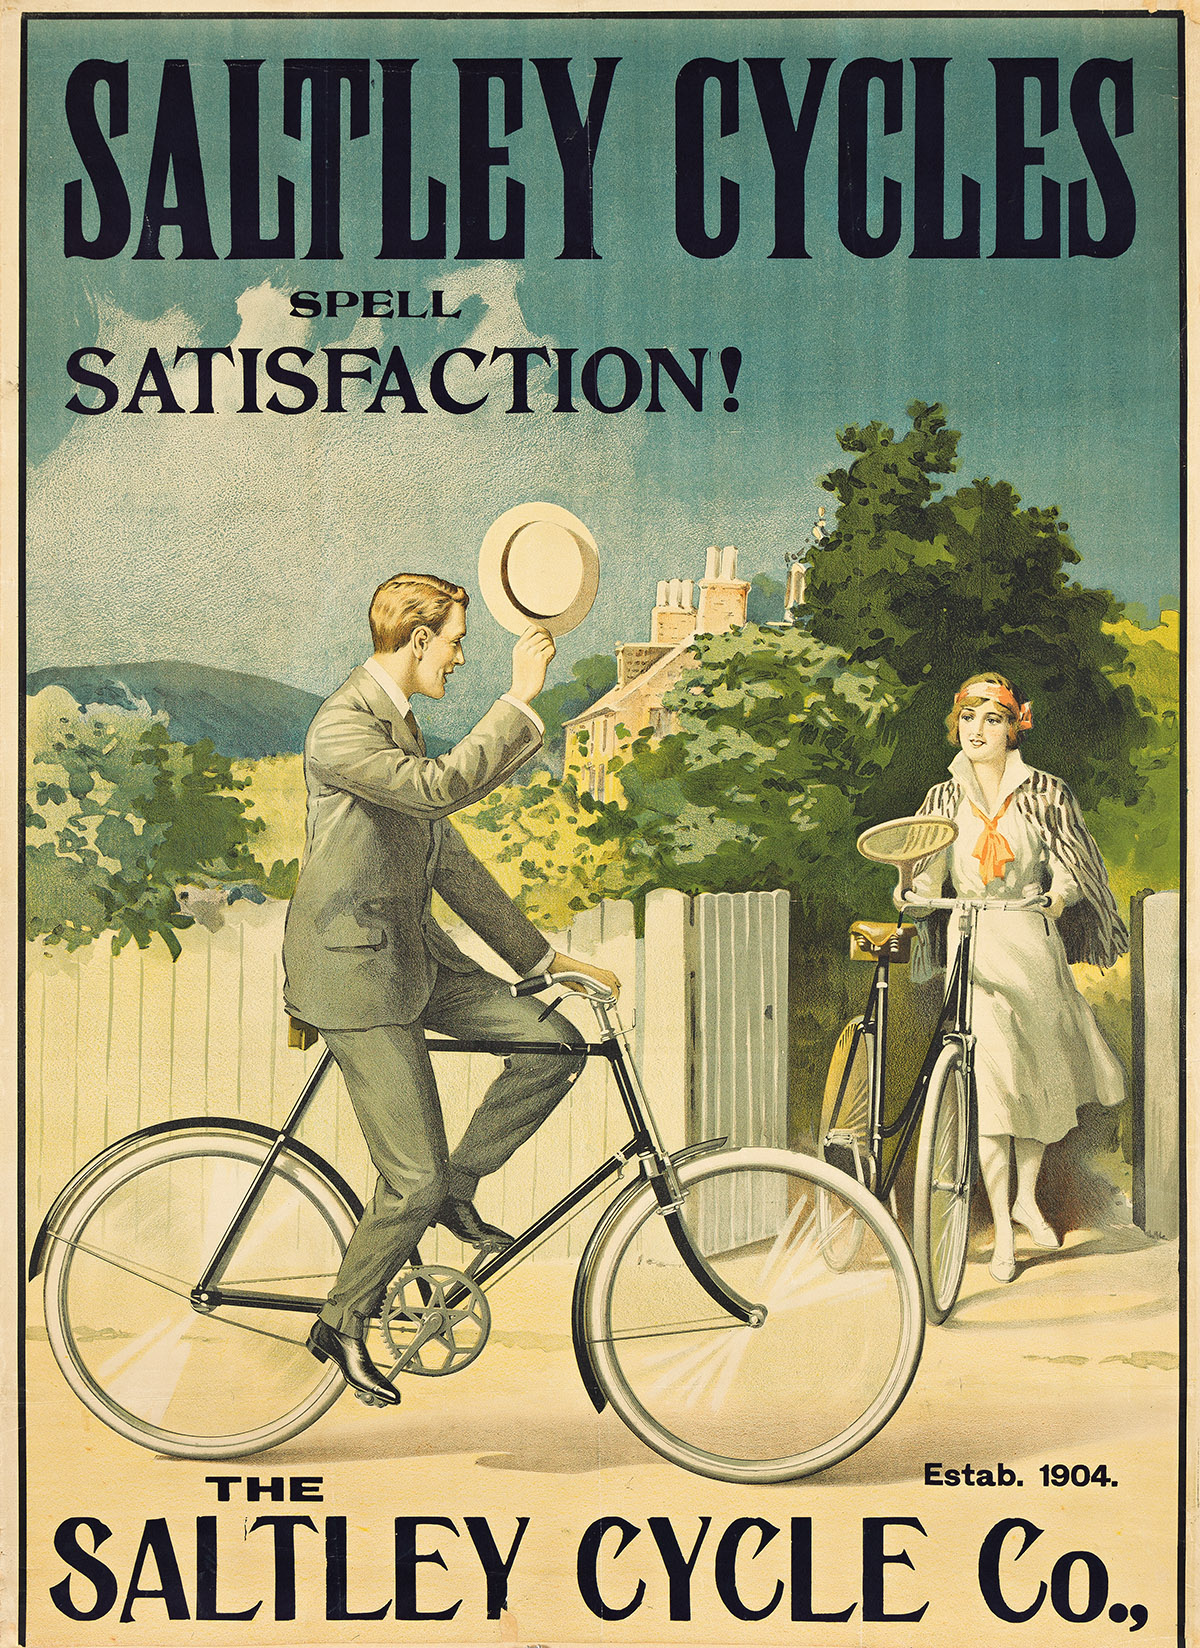 DESIGNER UNKNOWN. SALTLEY CYCLES SPELL SATISFACTION! Circa 1925. 54¾x40 inches, 139x101½ cm.